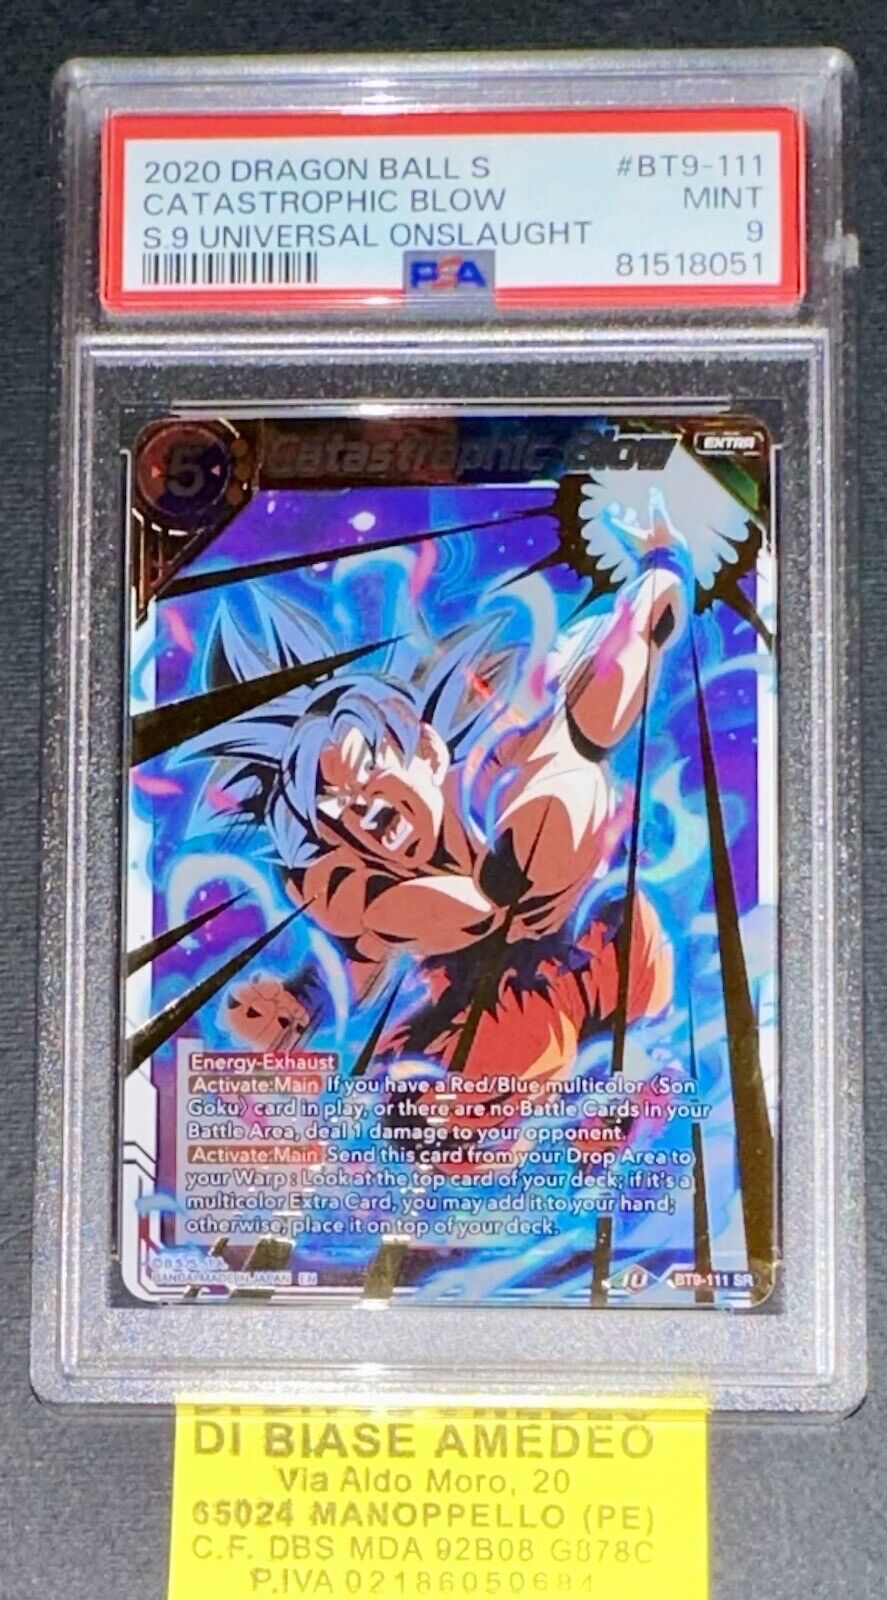 PSA 9 CATASTROPHIC BLOW BT9-111 SR S.9 UNIVERSAL ONSLAUGHT DB SUPER CARD GAME